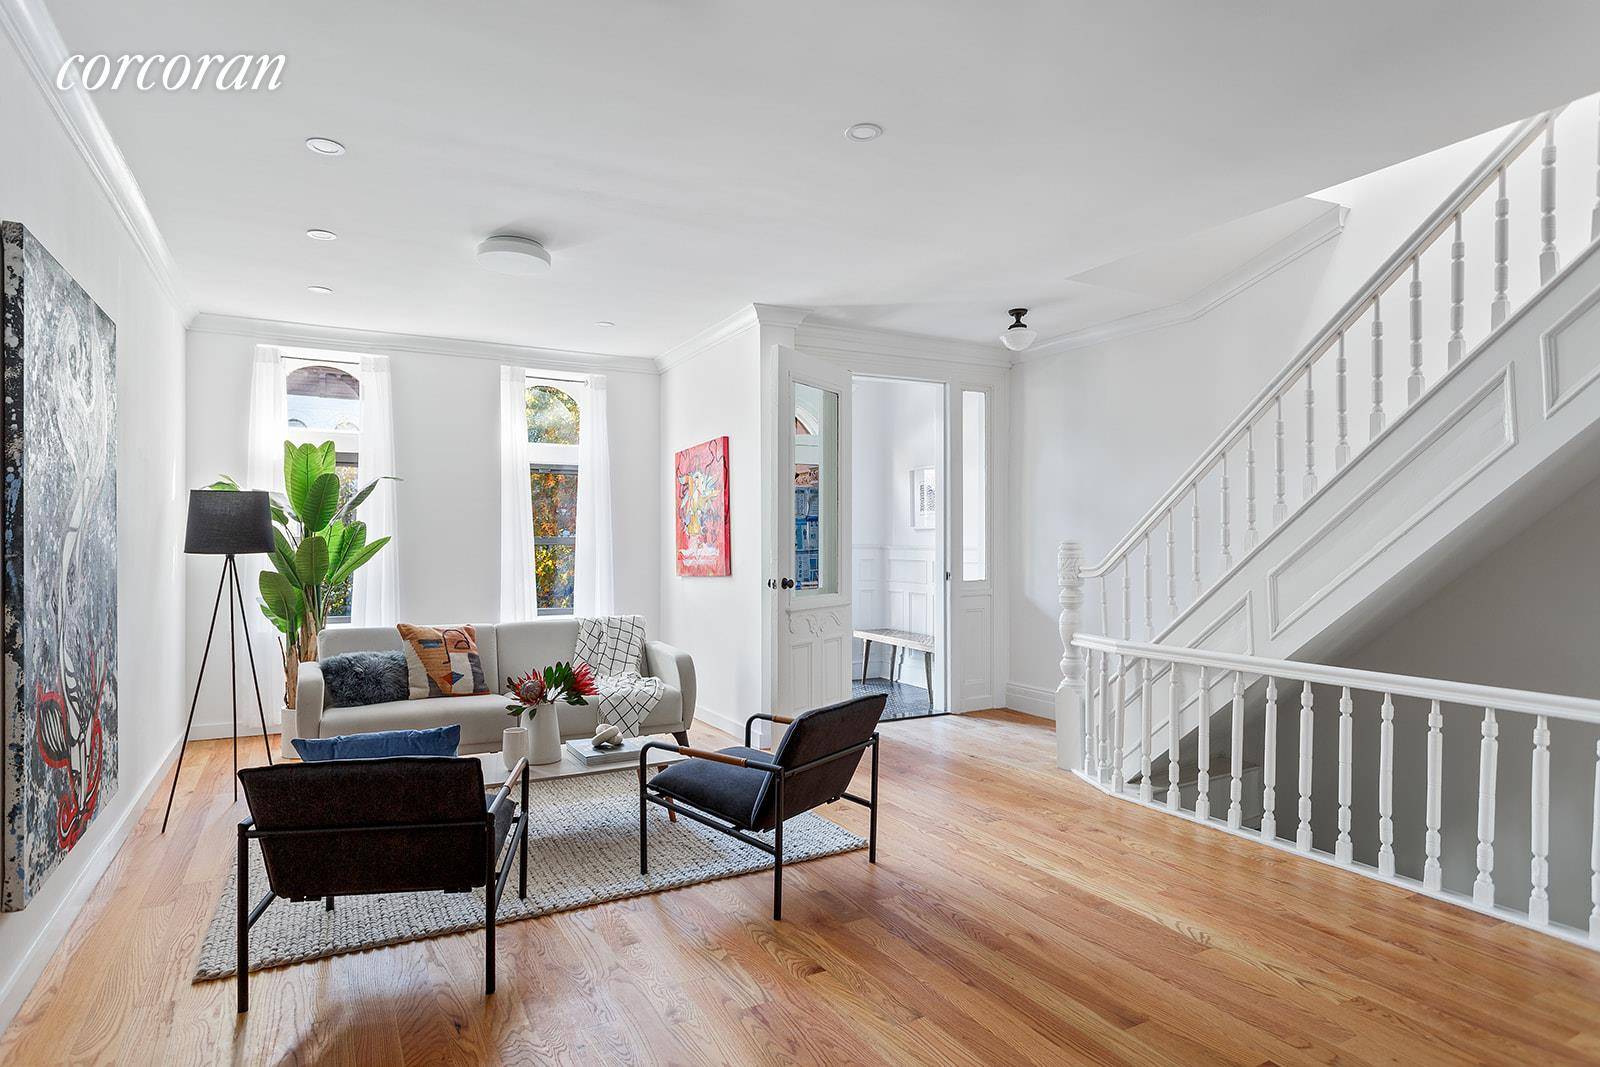 Welcome to 699 Halsey Street, a beautifully renovated two family brownstone on a picturesque tree lined block.